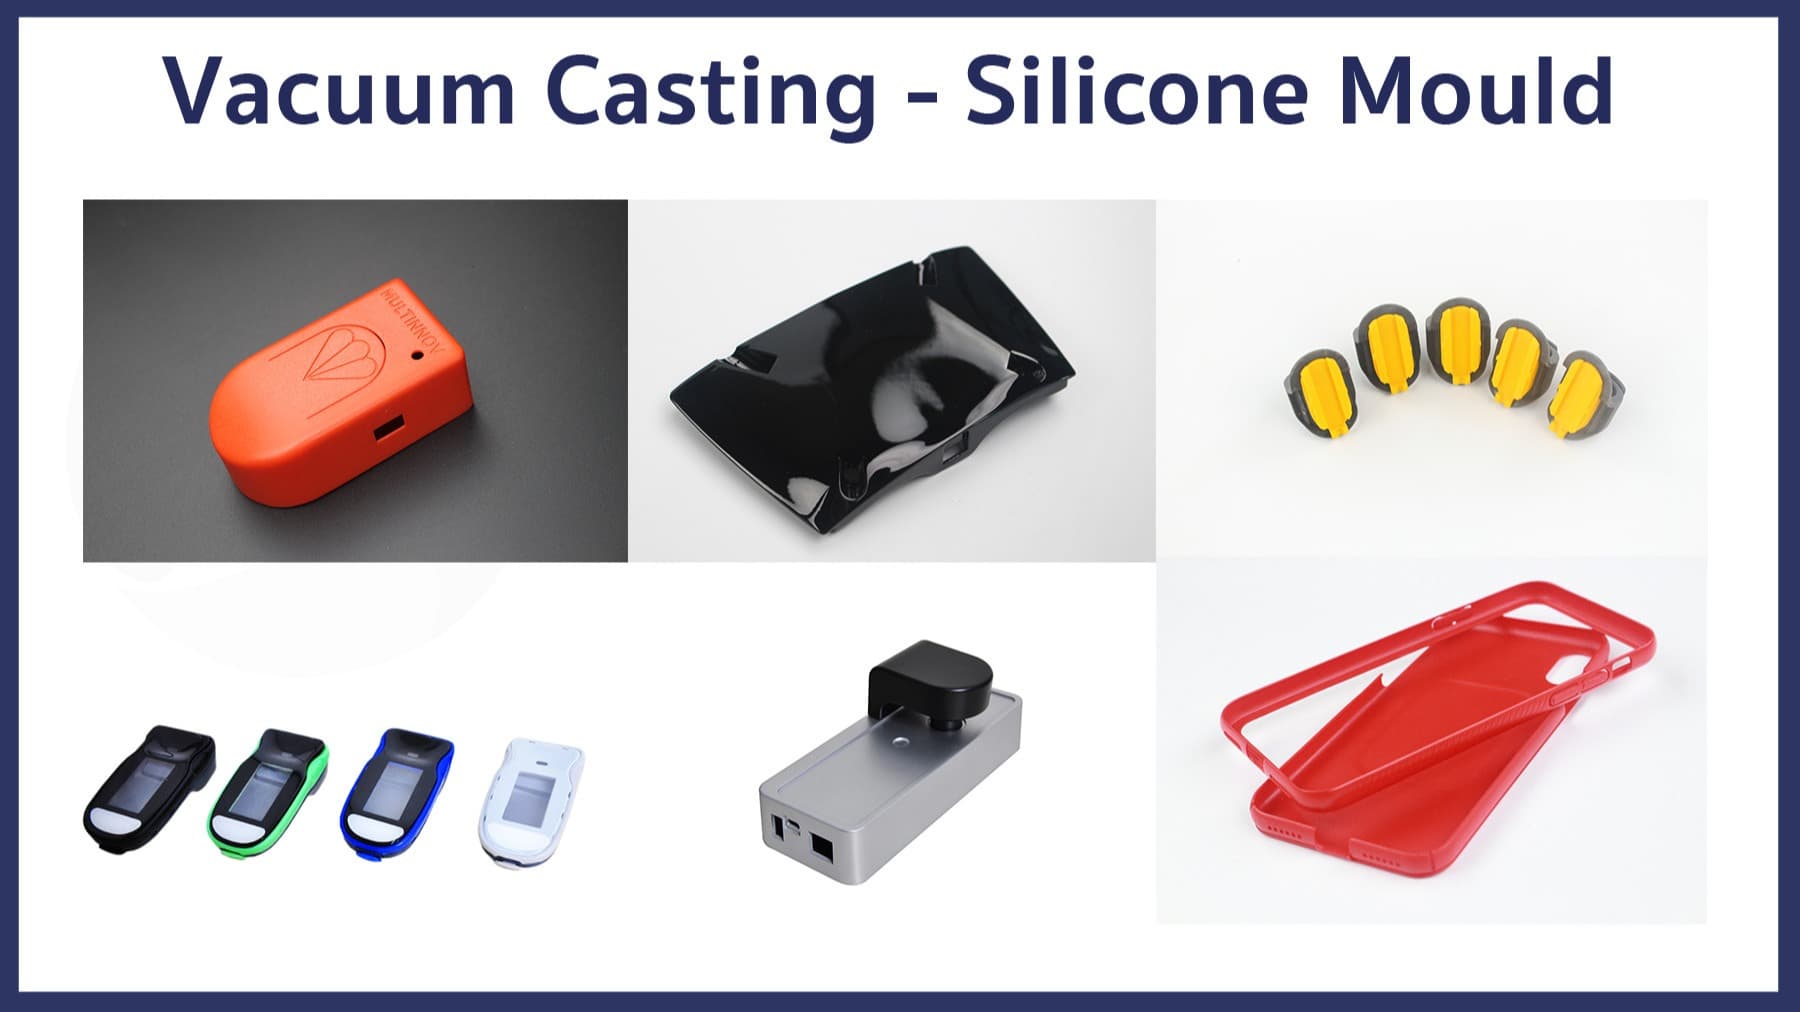 Some examples of plastic parts produced with silicone moulds.